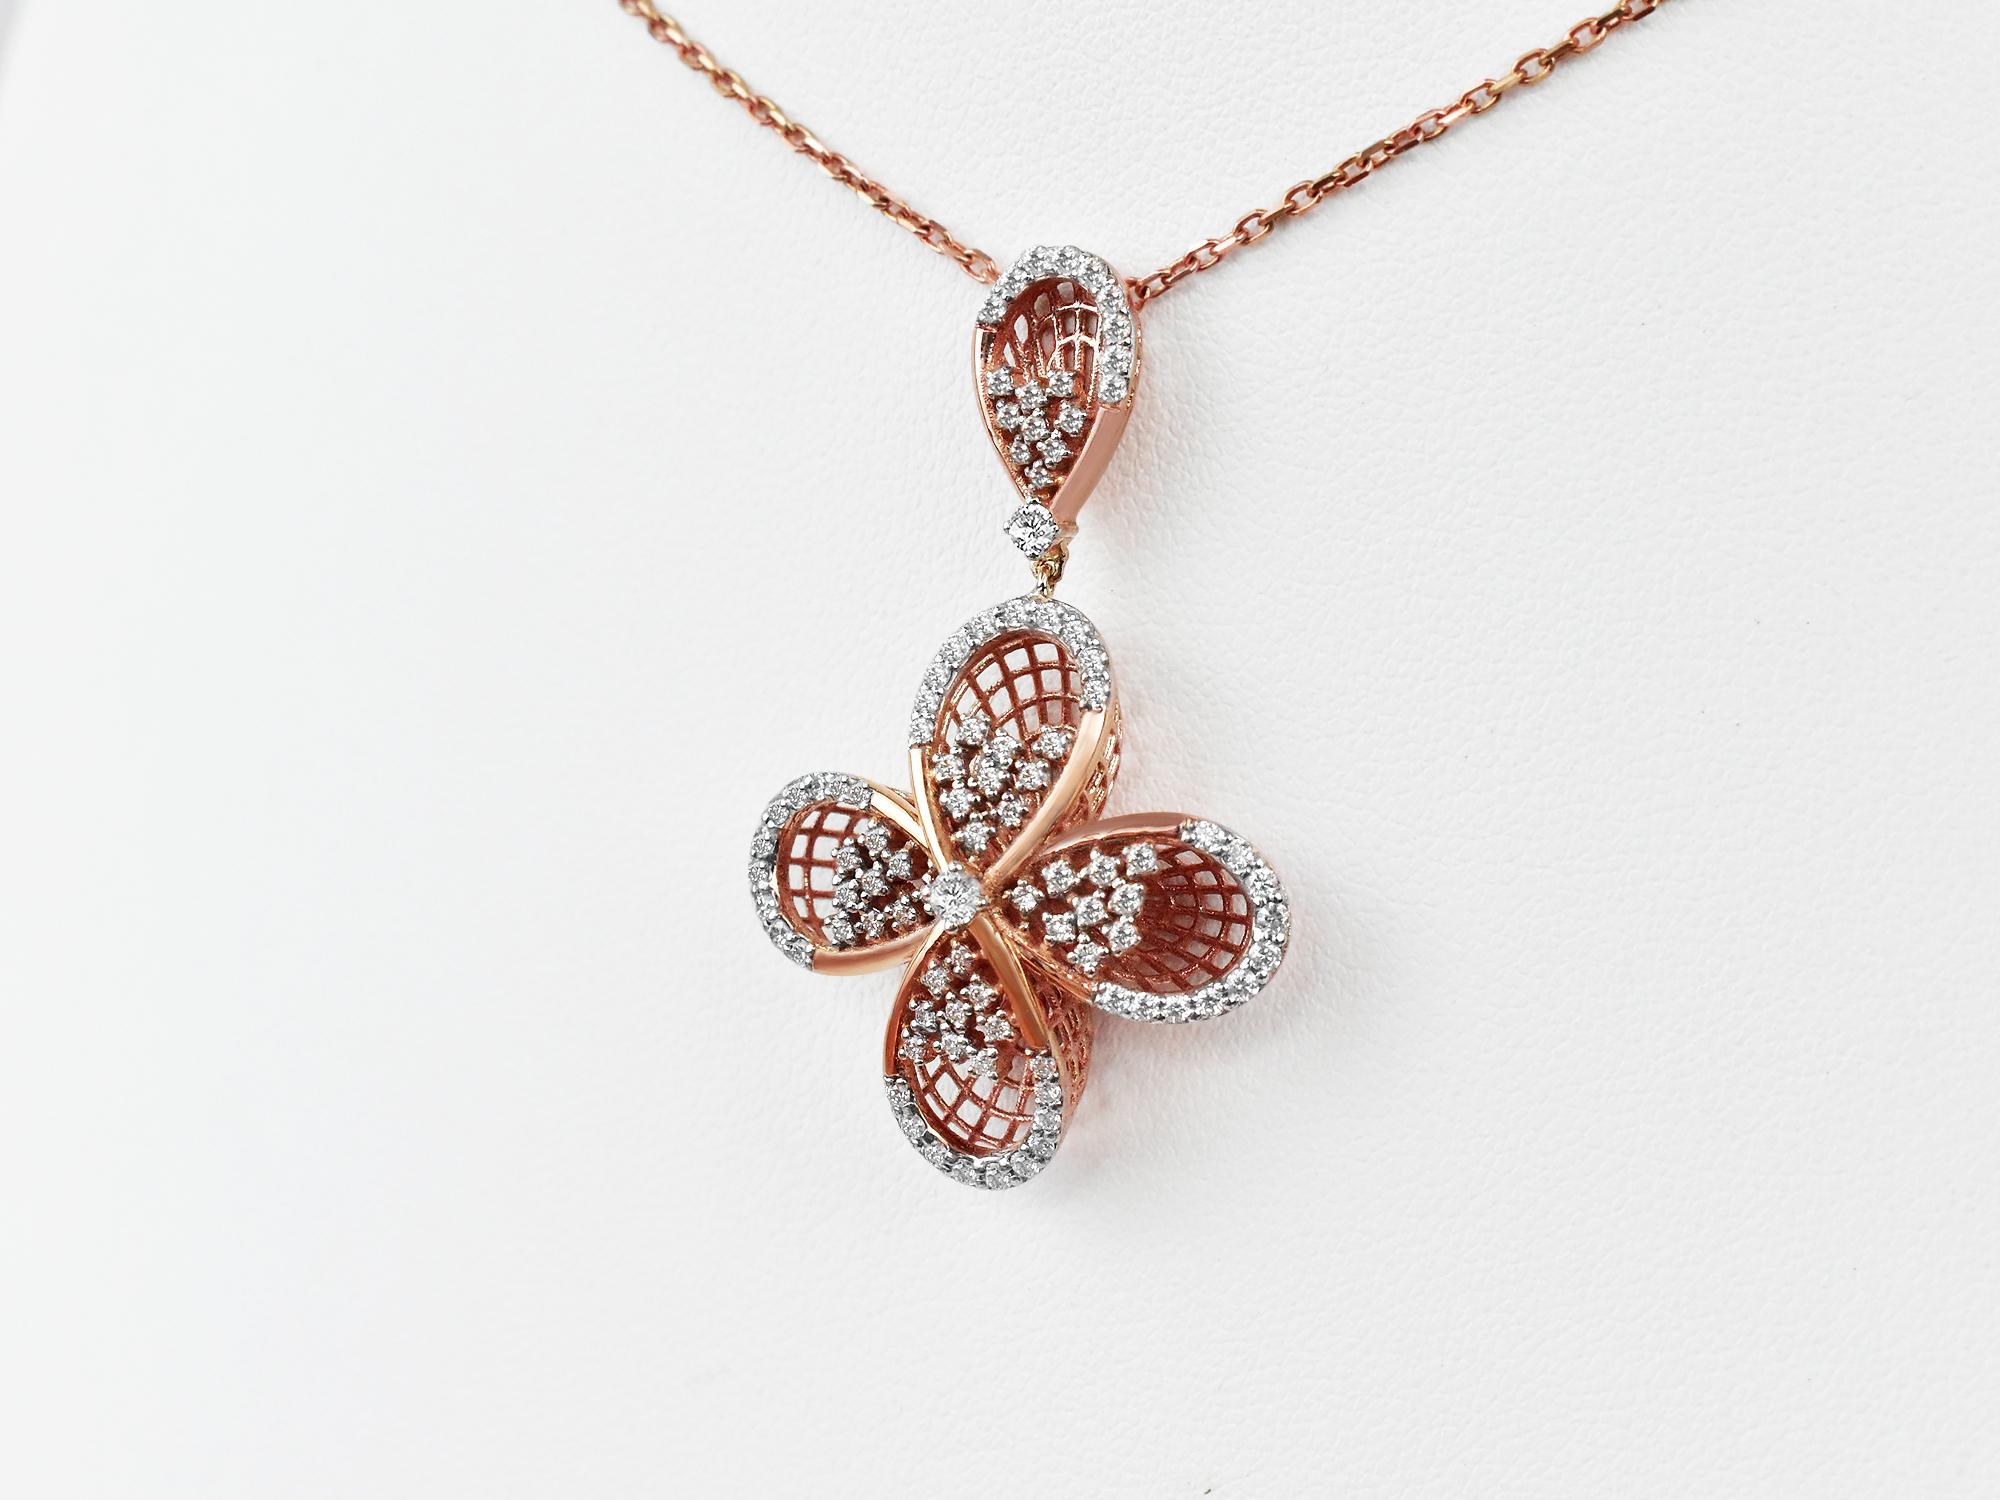 18Karat Gold Pendant Necklace Two-Tone White Gold Rose Gold Diamond Pave Dangle Floral Fashion Pendant Necklace
     A fashion Art Noumea floral pendant necklace meticulously crafted to mesmerize. Each part of this art piece shows the passion for